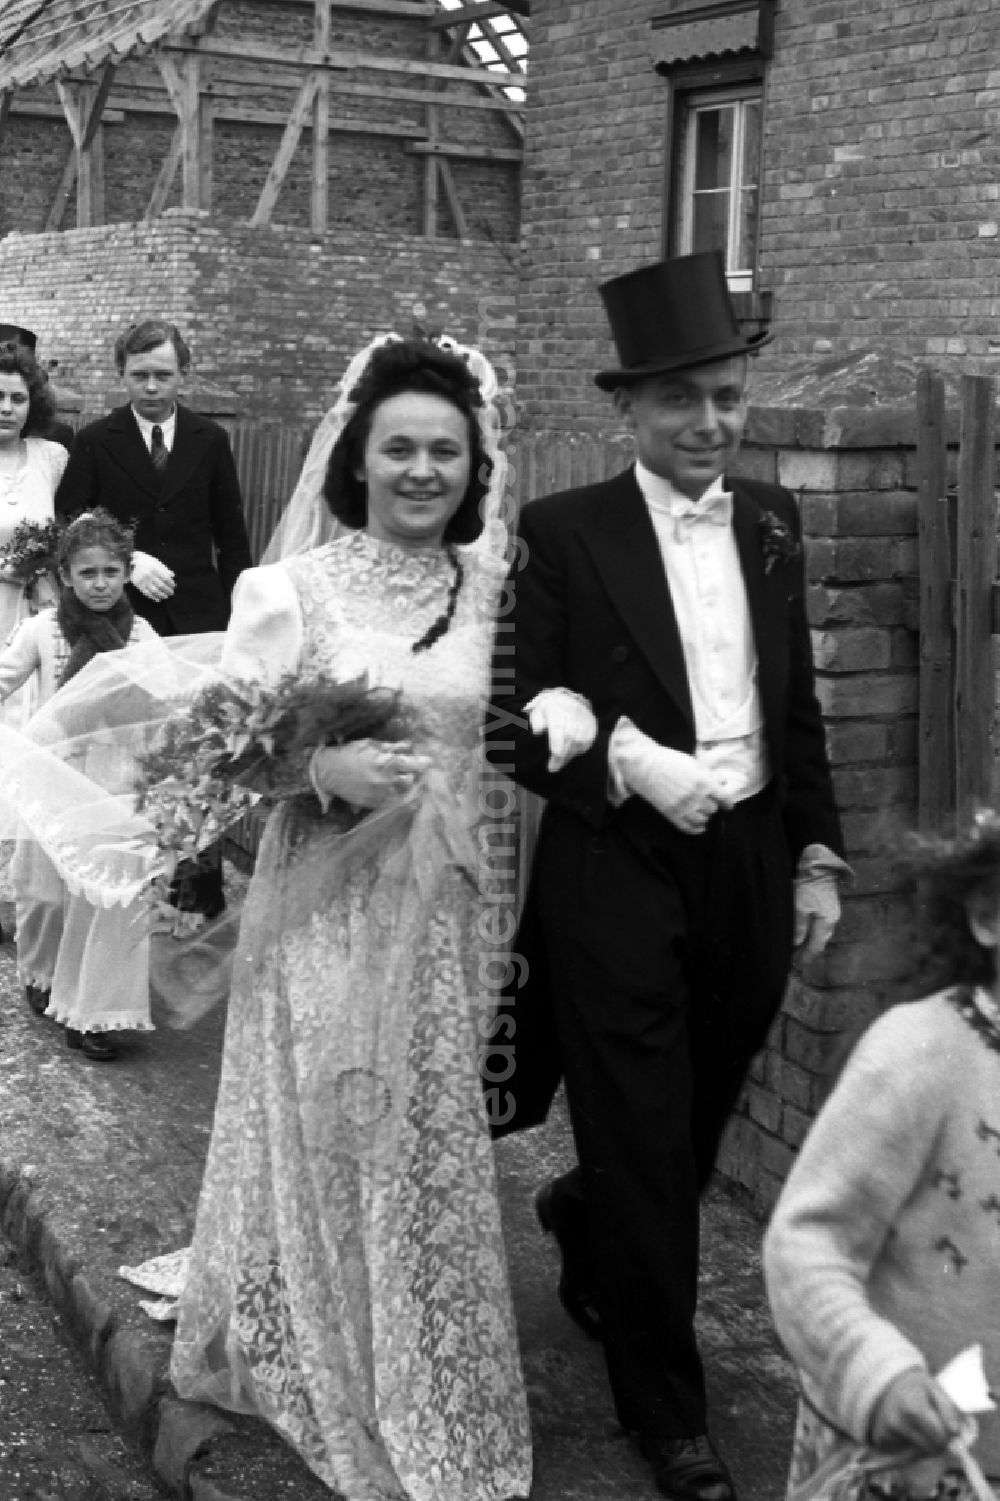 GDR photo archive: Merseburg - A bride and groom in Merseburg in the federal state Saxony-Anhalt in Germany